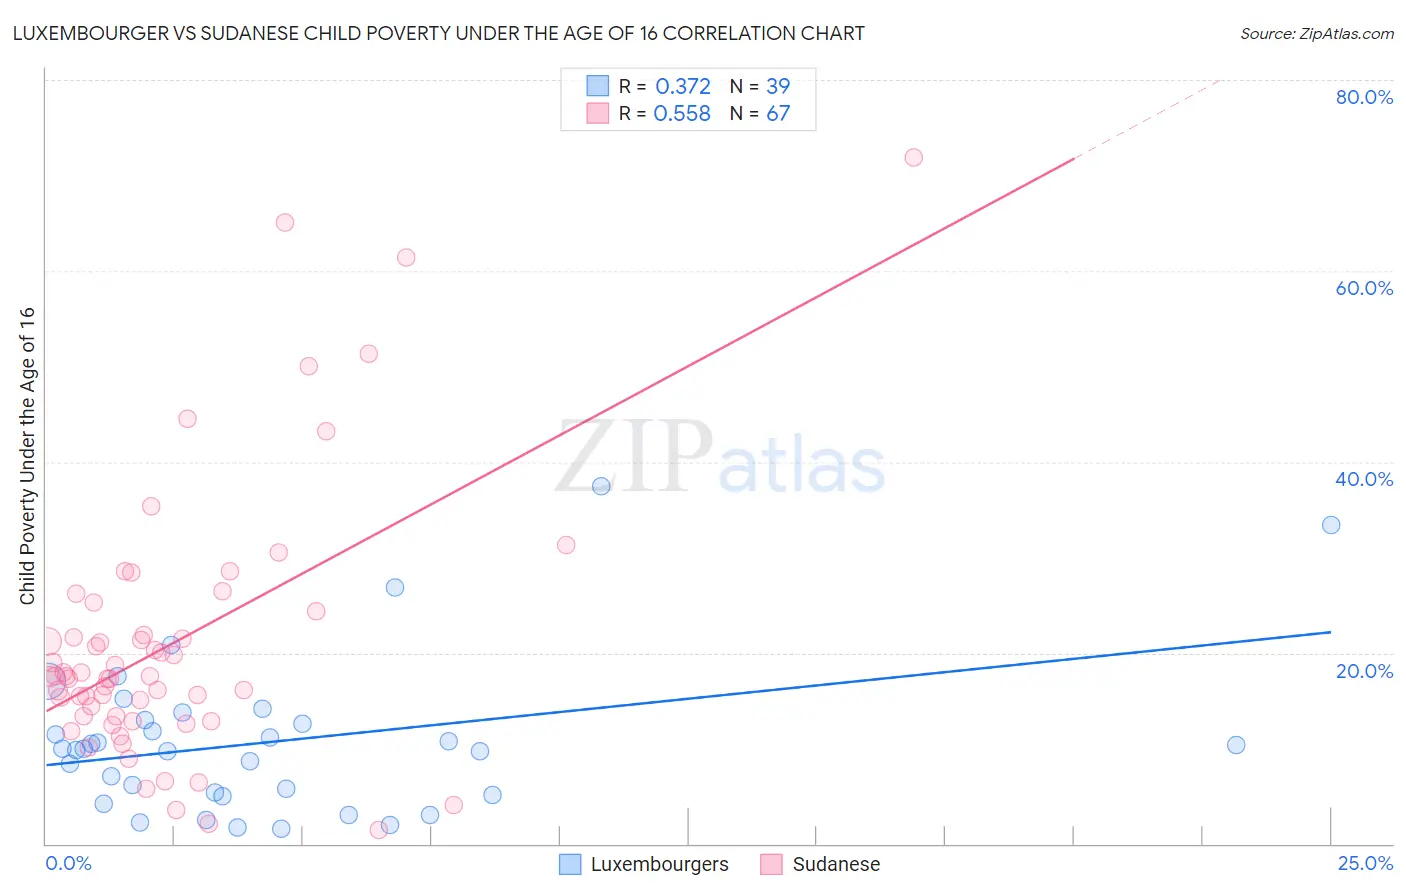 Luxembourger vs Sudanese Child Poverty Under the Age of 16